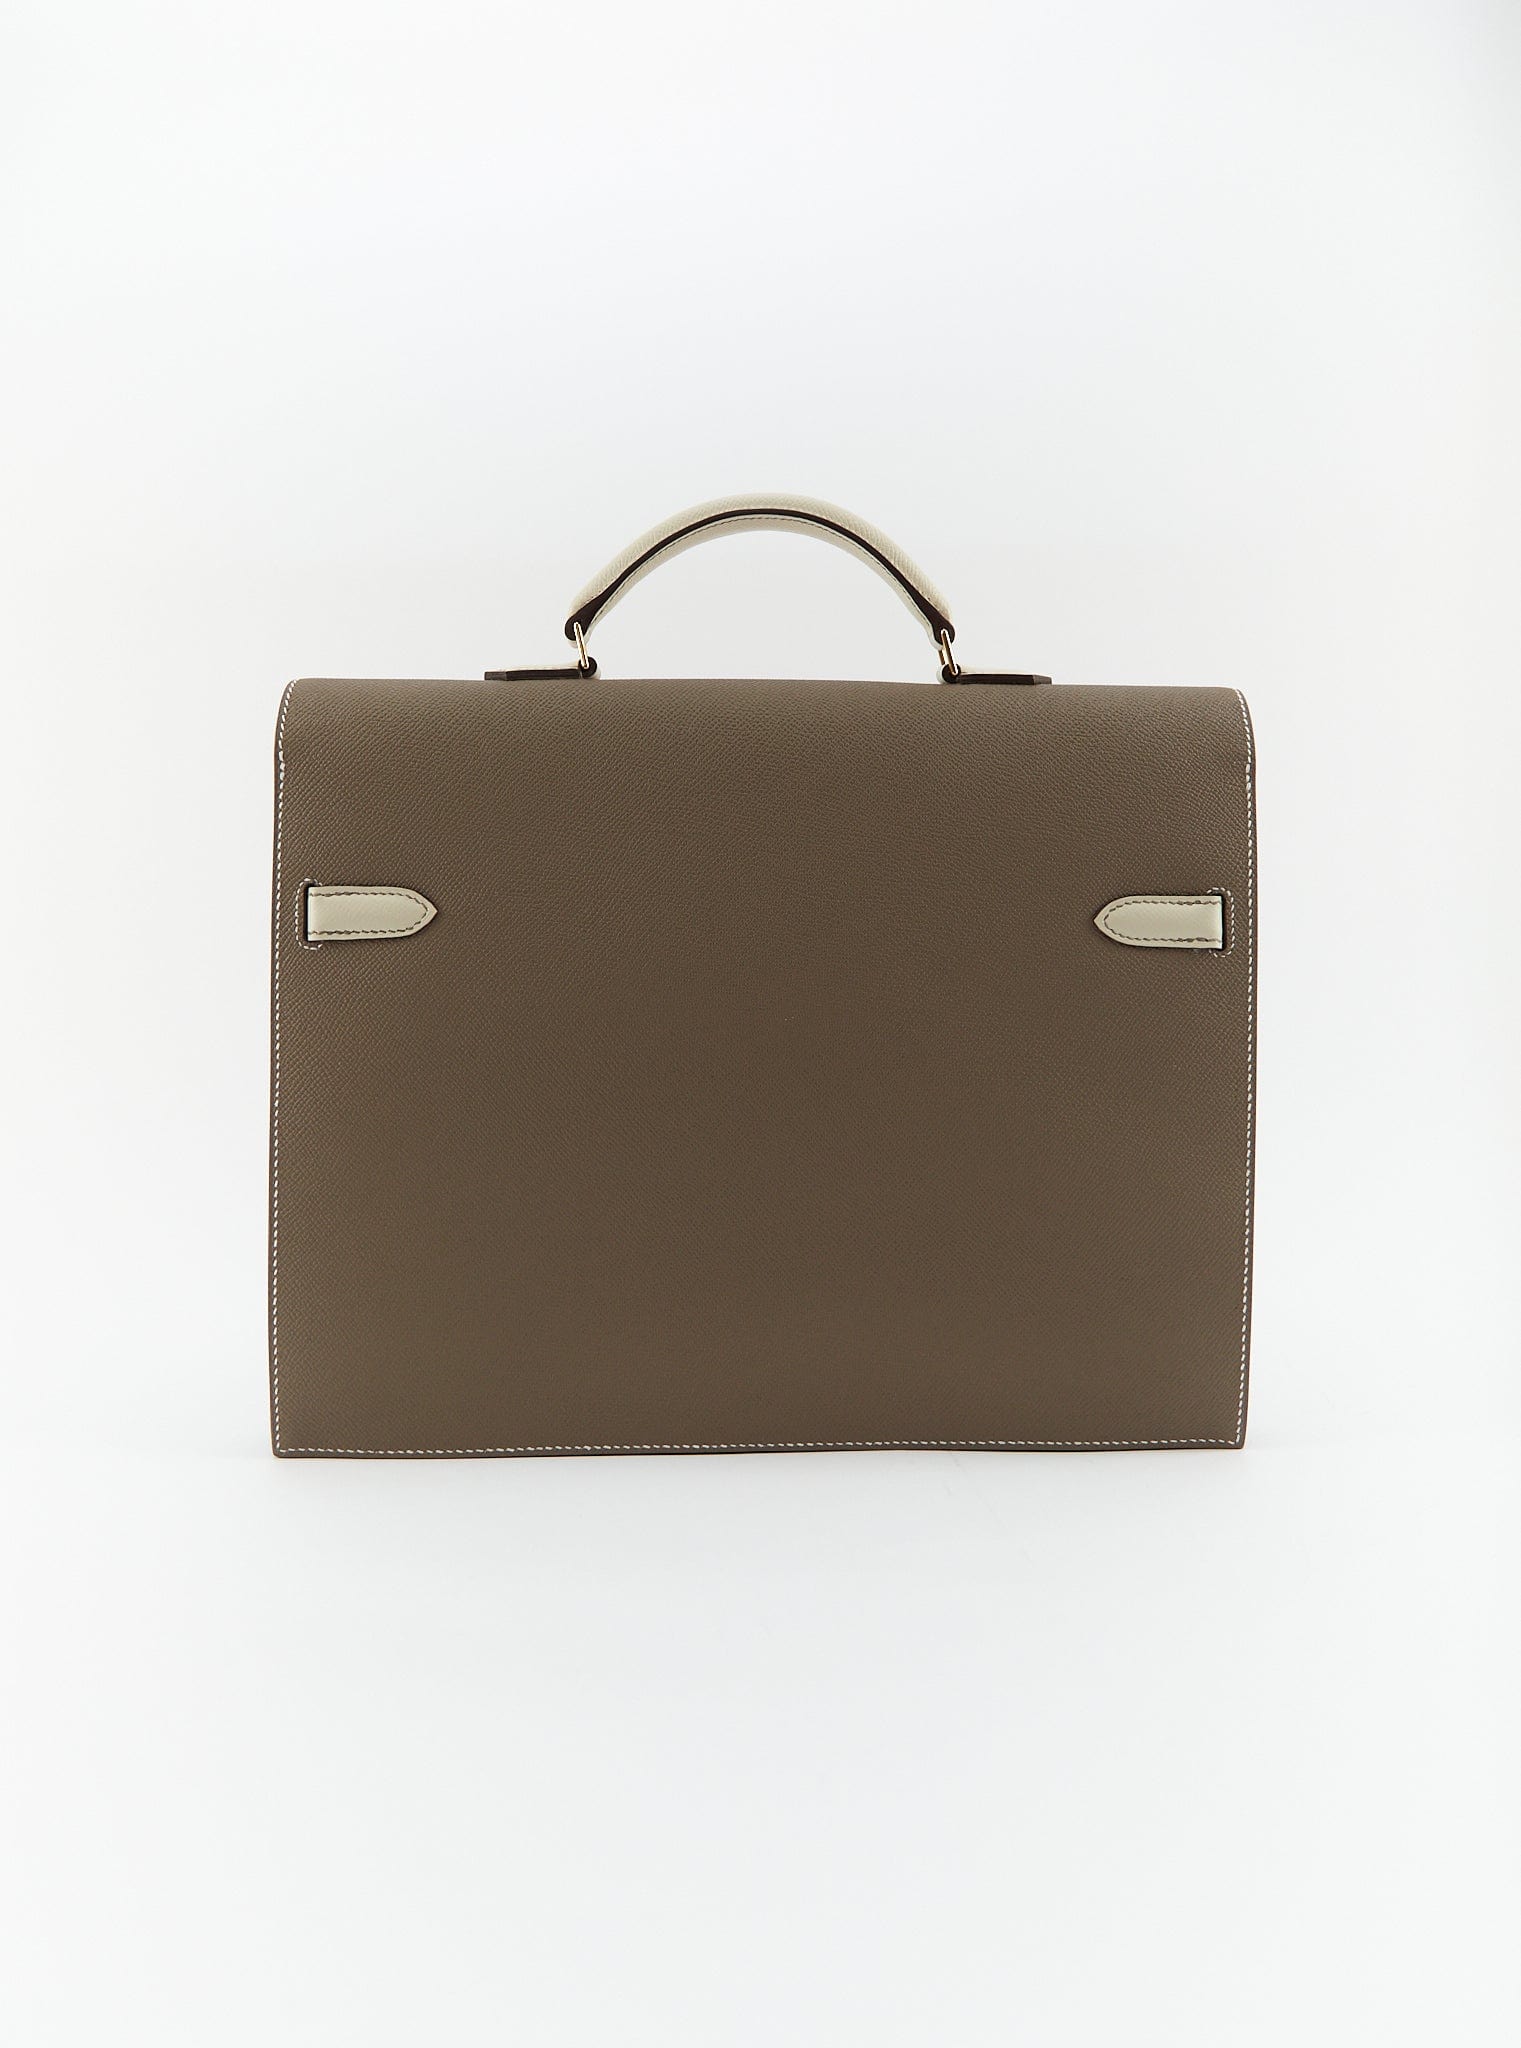 www.LuxuryVault.London HERMÈS KELLY DEPECHES 34CM HSS SPECIAL ORDERE ETOUPE & CRAIE Epsom Leather with Gold Hardware